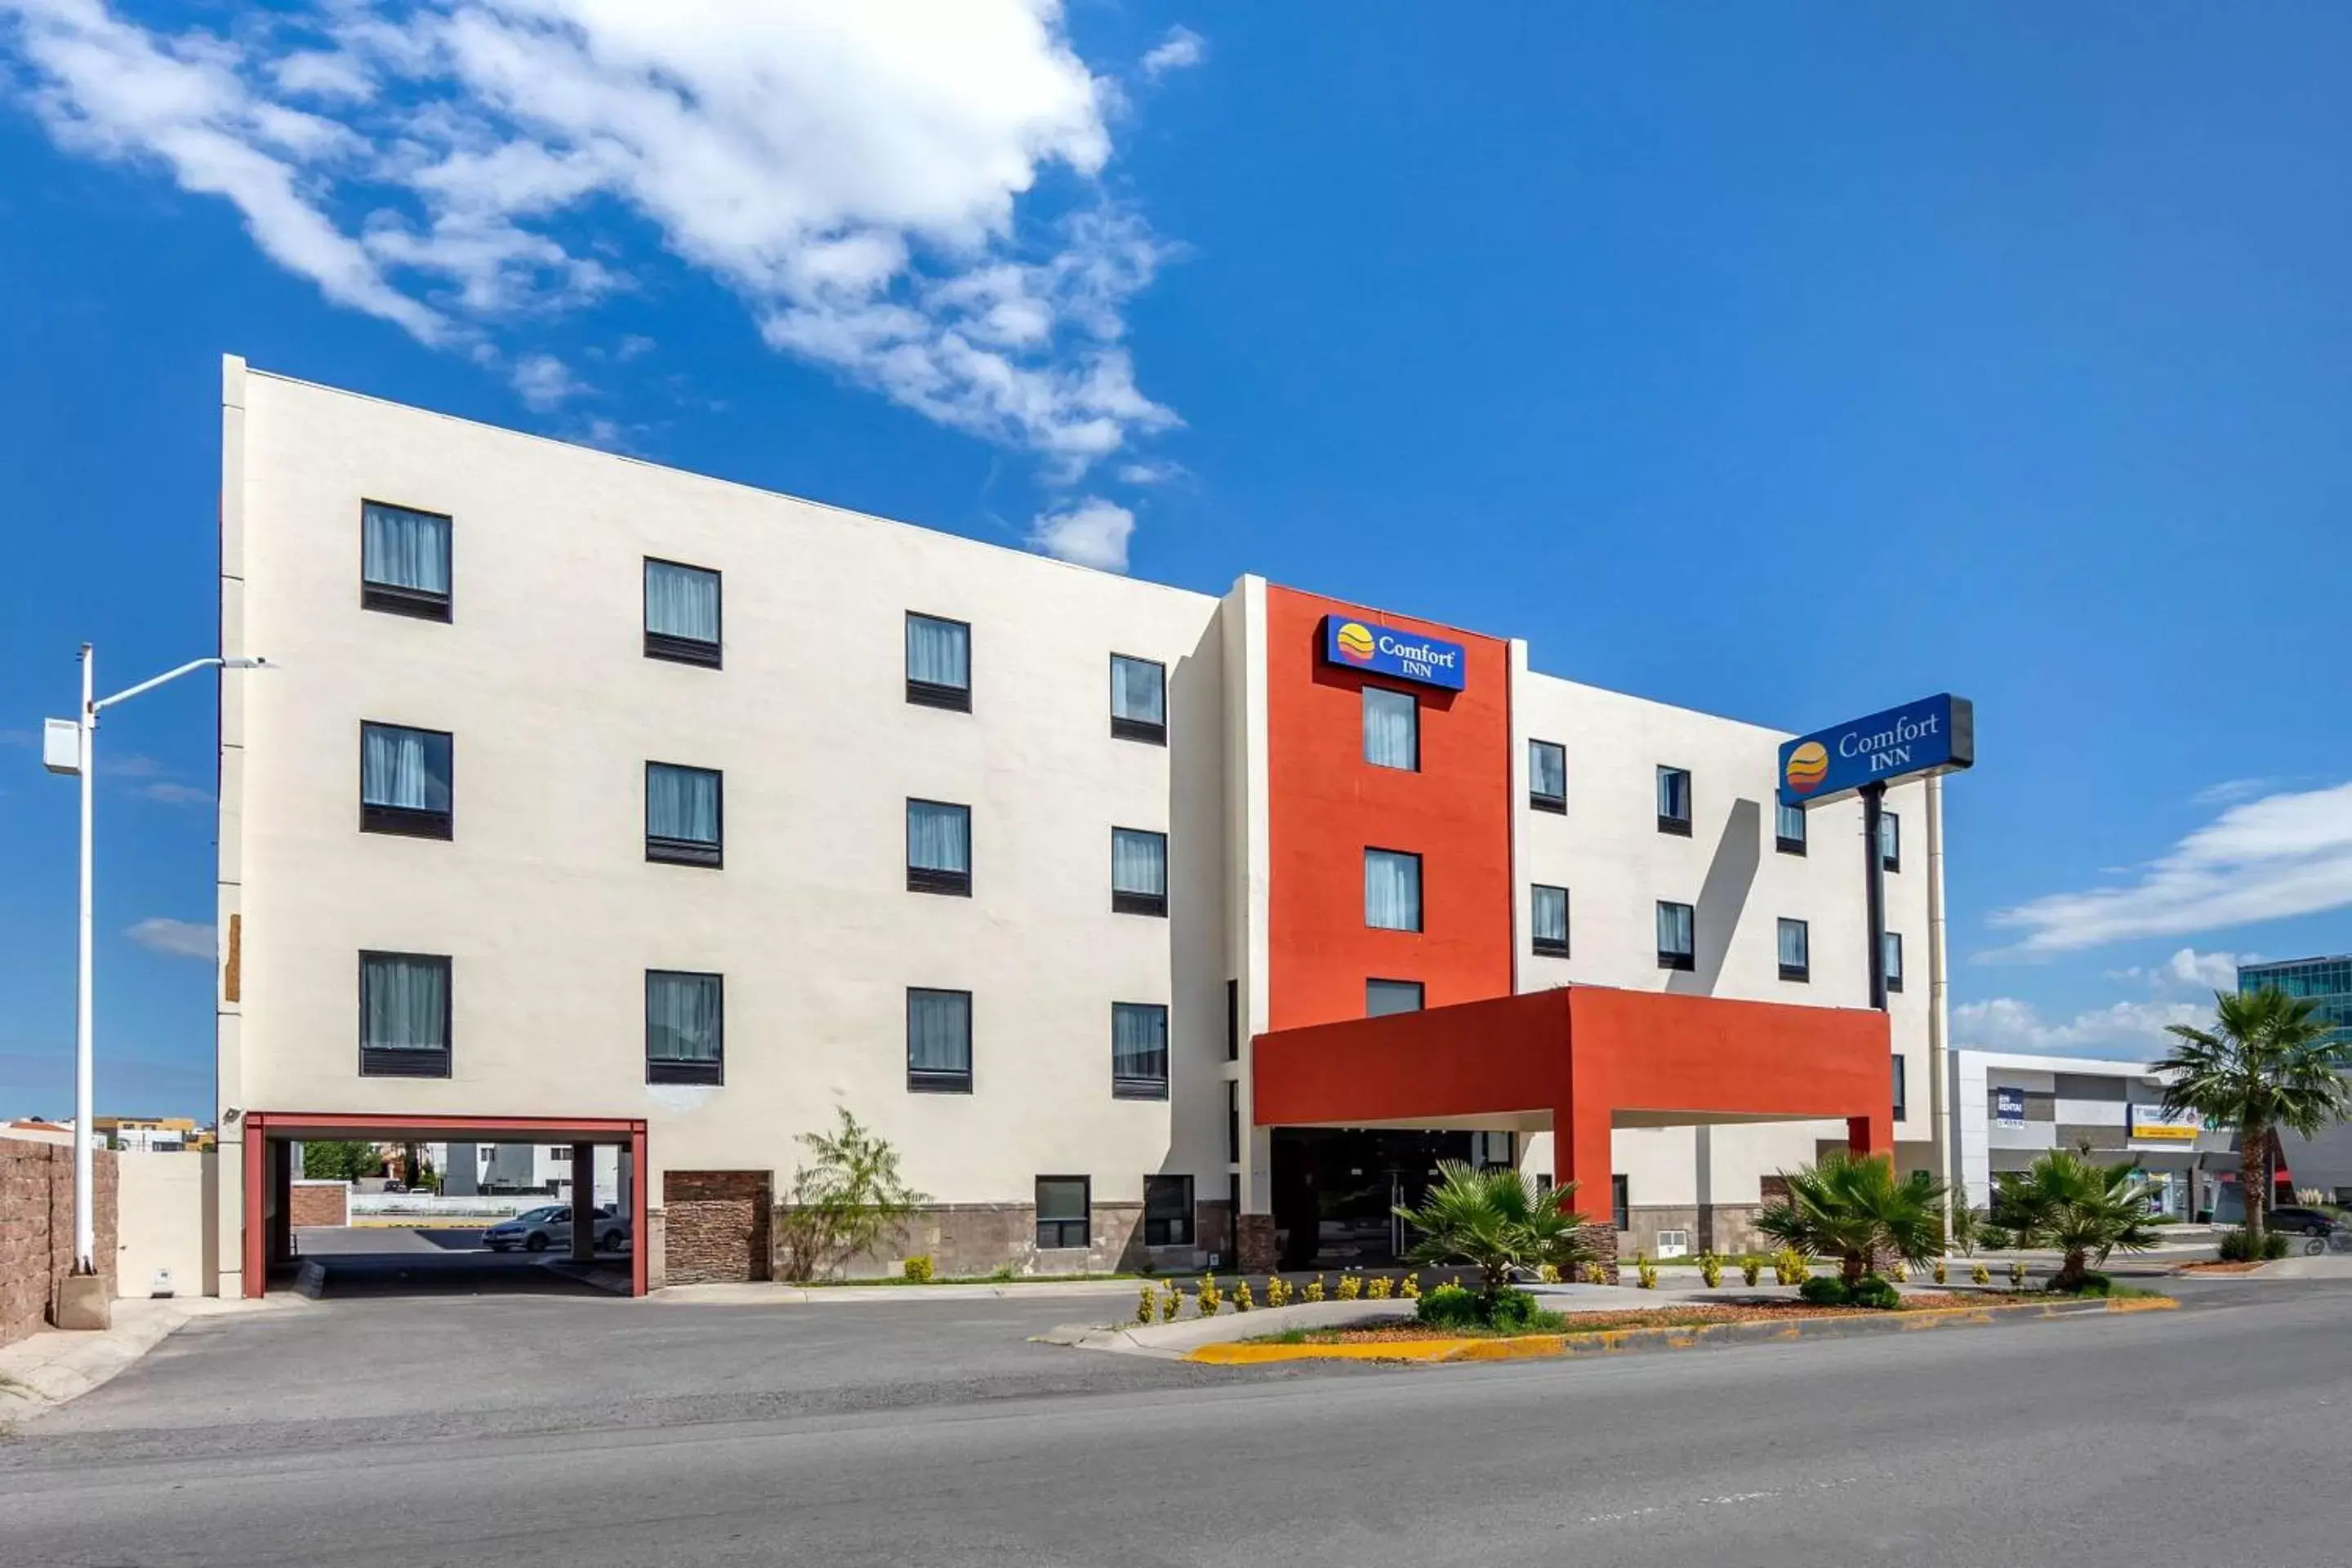 Property Building in Comfort Inn Chihuahua